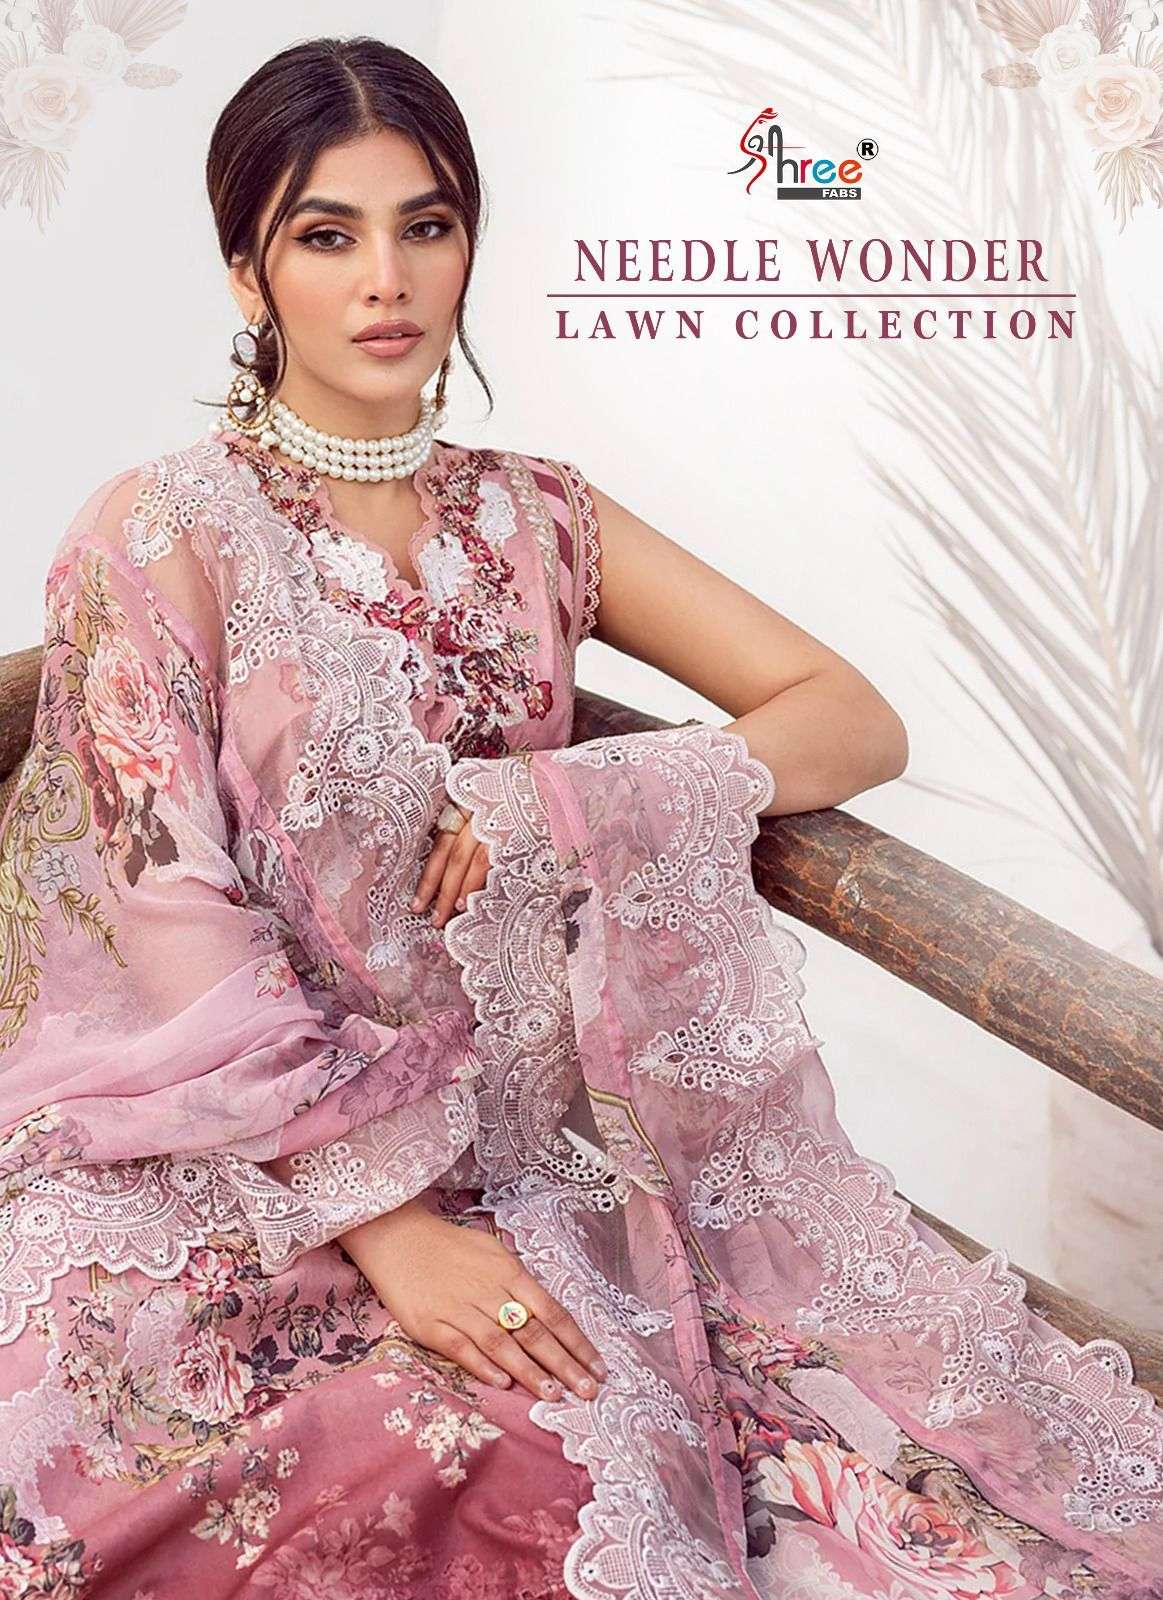 shree fab needle wonder lawn collection designer patch embroidery pakistani suit 